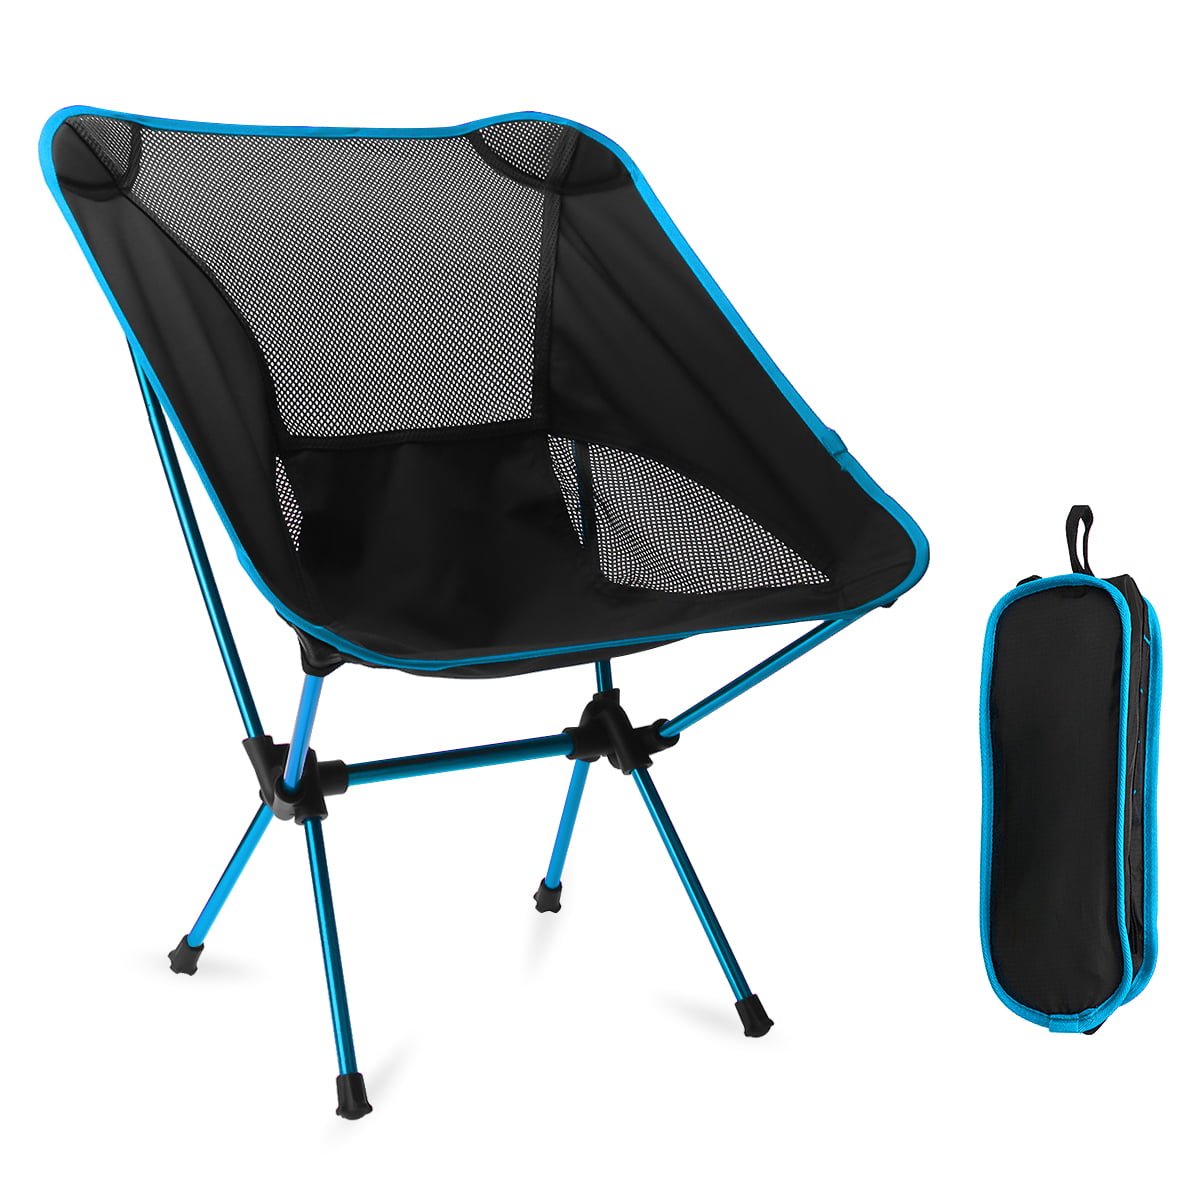 BBQ,Beach Backpacking miuse Ultralight Backpacking Camping Chair,portable Folding Compact Camping Chair for Outdoor Camping Picnic Hiking